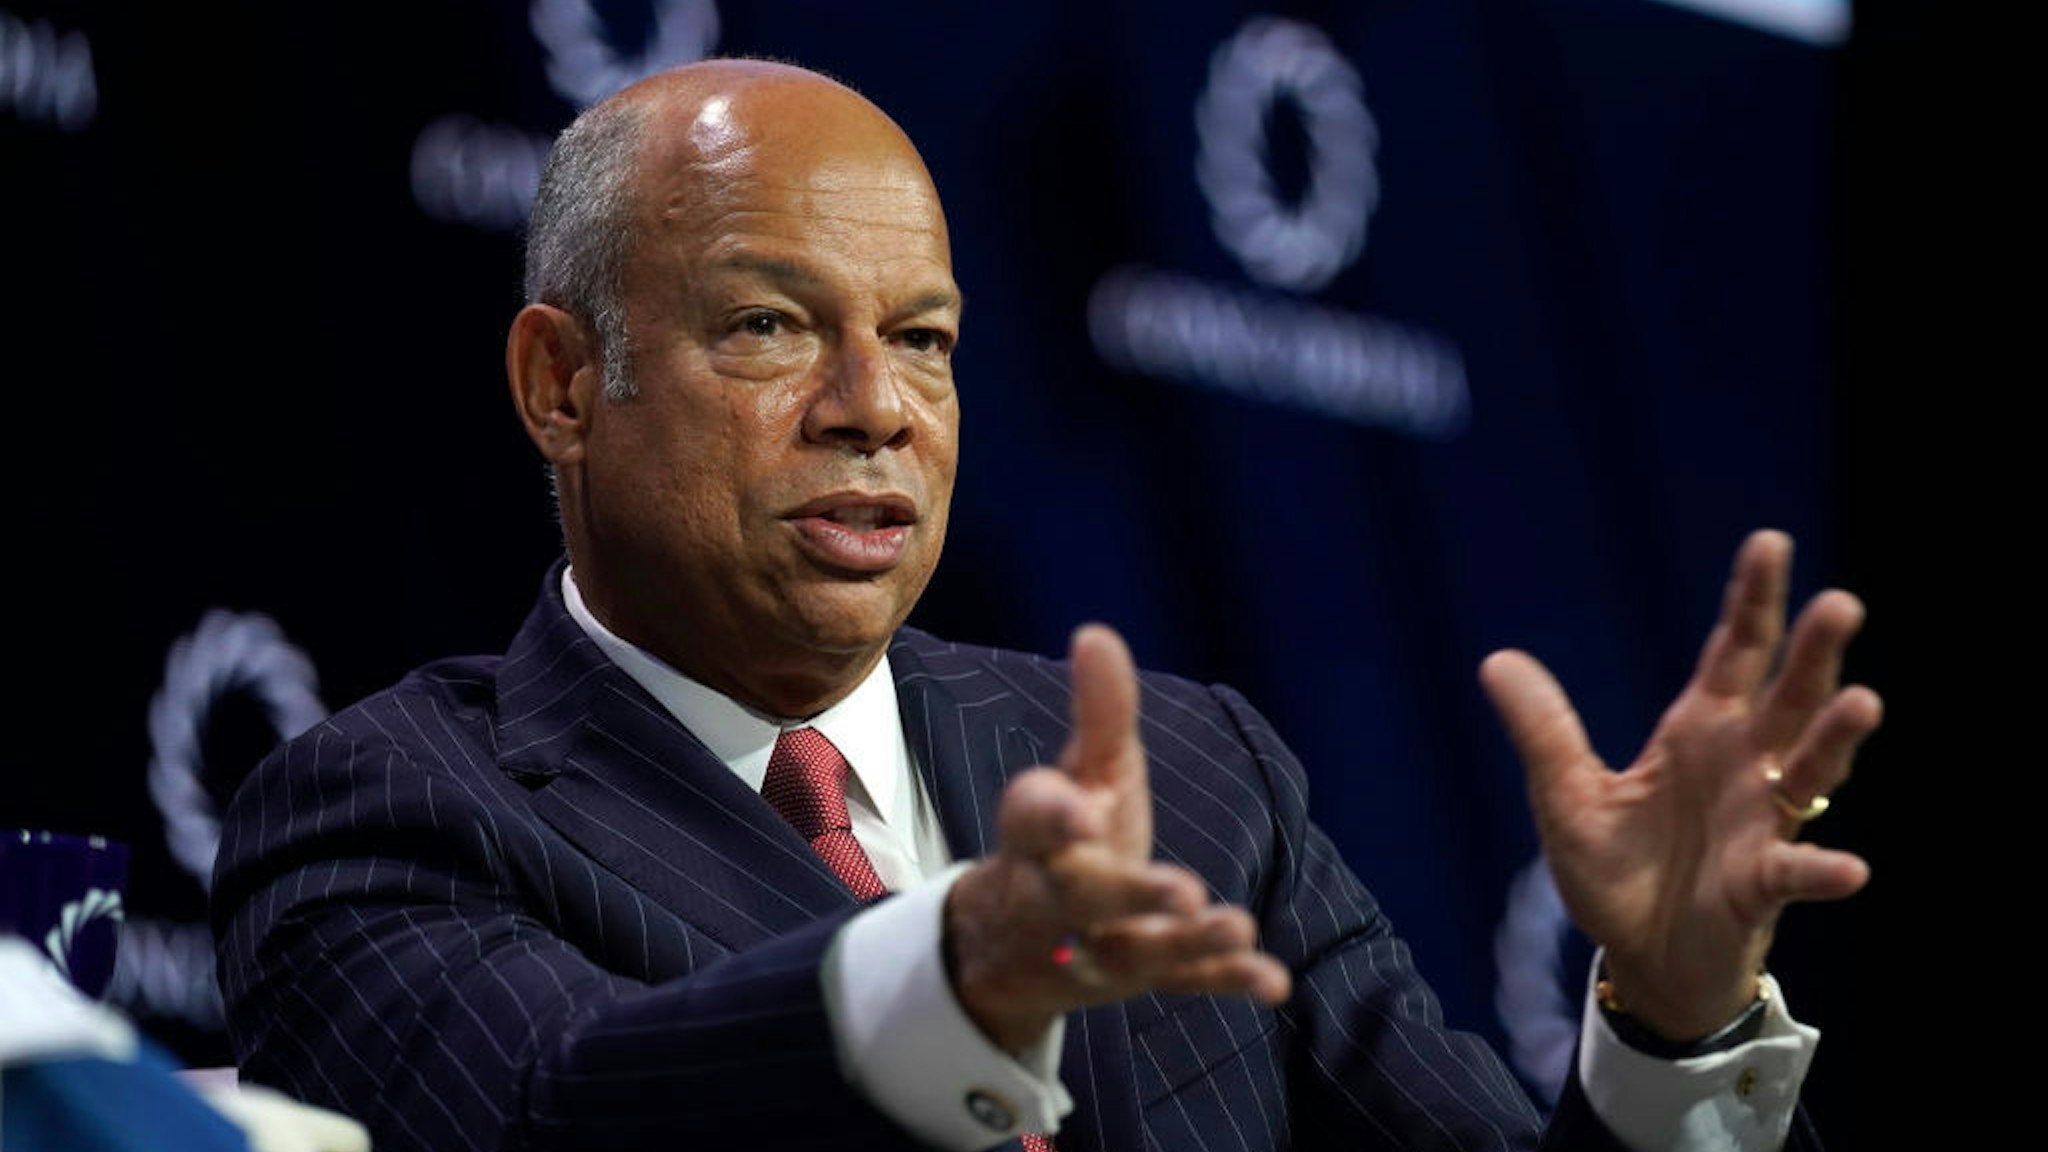 Jeh Johnson, Former Secretary, U.S. Department of Homeland Security, speaks onstage during the 2019 Concordia Annual Summit - Day 2 at Grand Hyatt New York on September 24, 2019 in New York City. (Photo by Riccardo Savi/Getty Images for Concordia Summit)